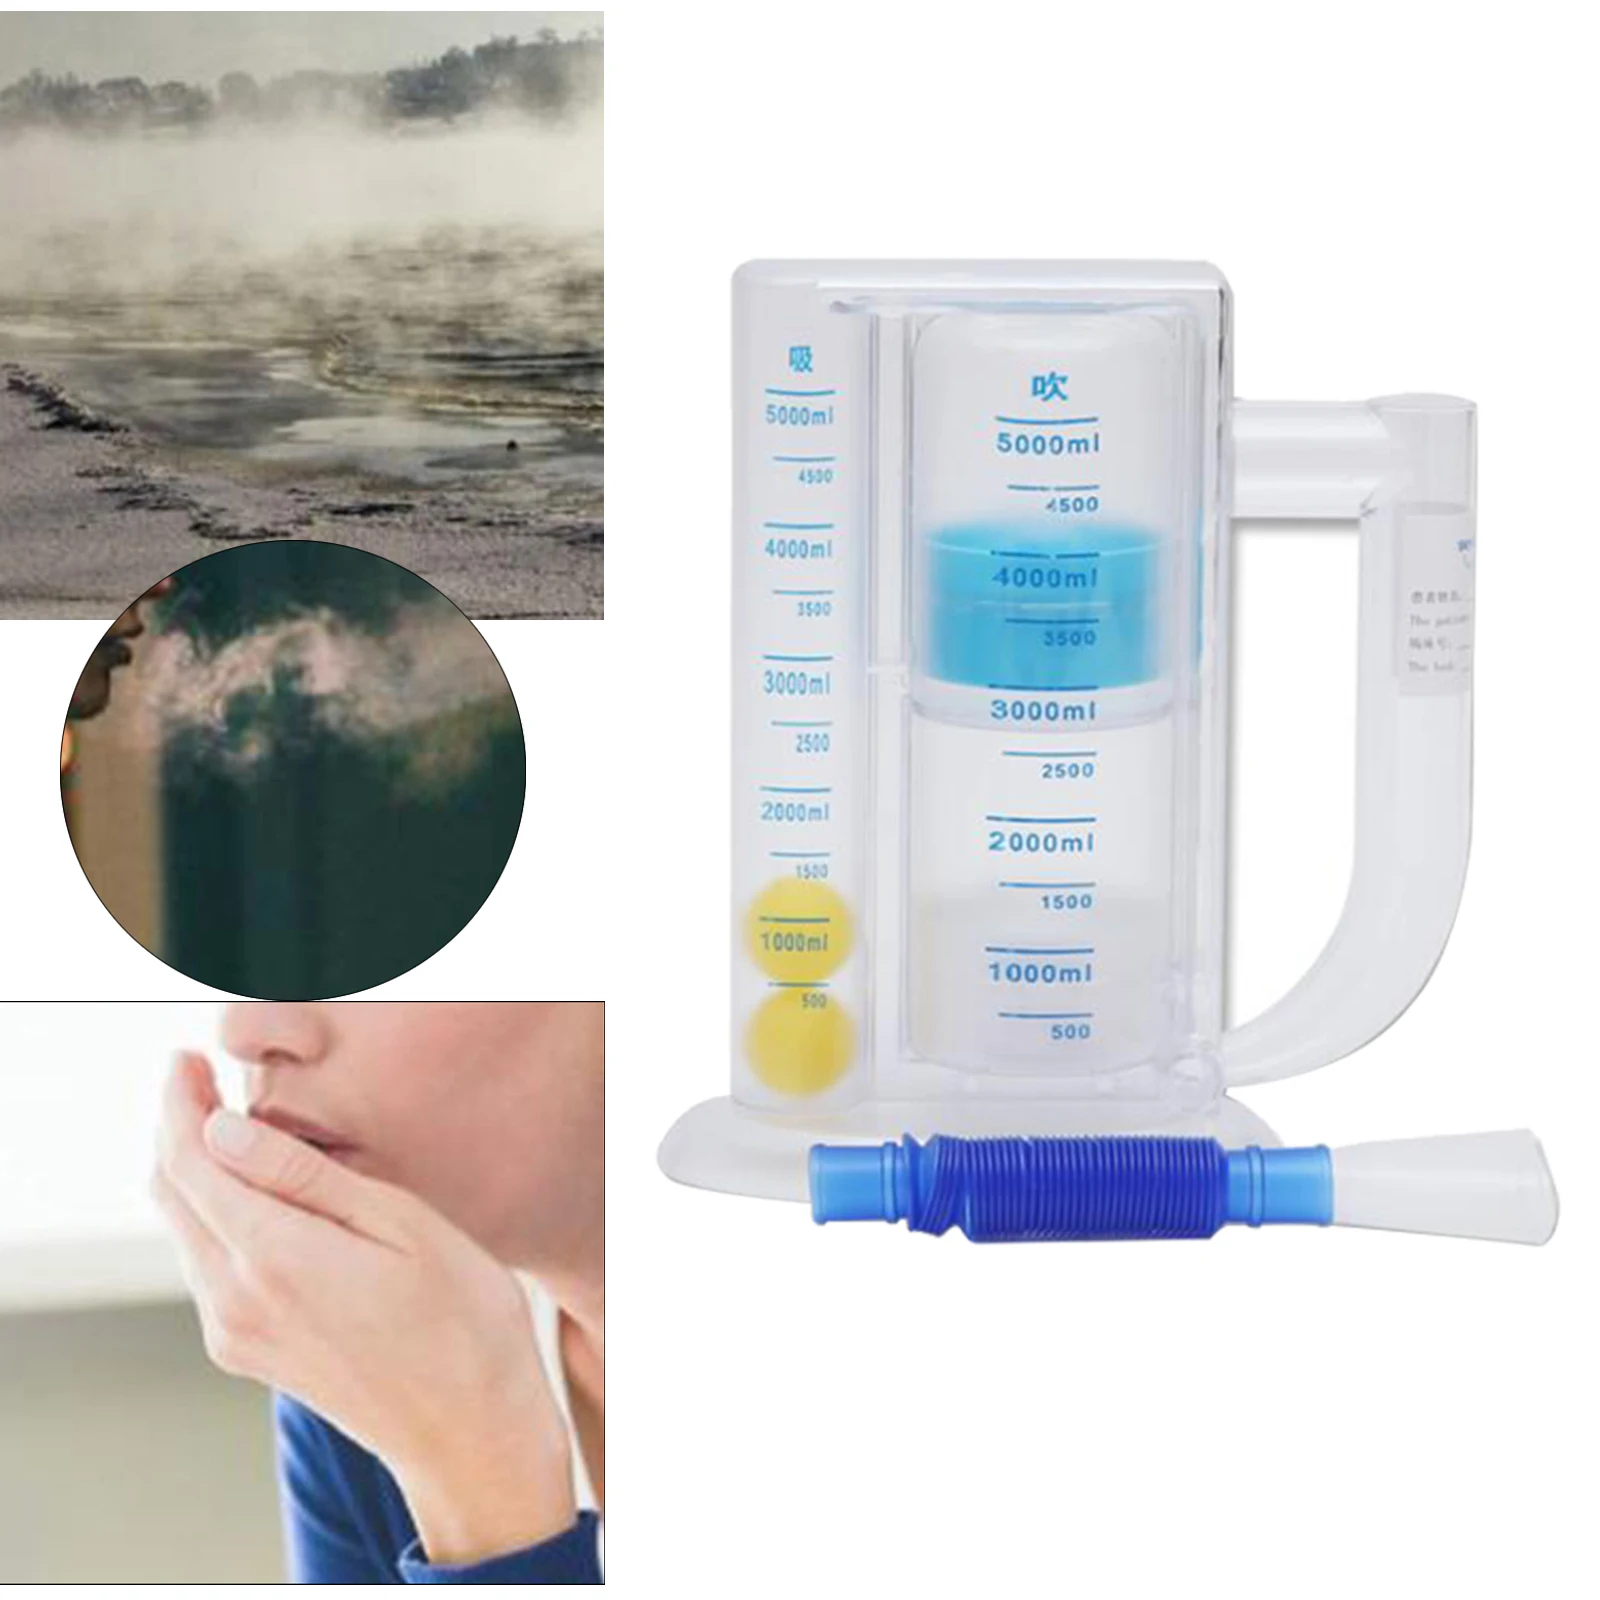 5000ml Lung Deep Breathing Trainer Exerciser, Breath Measurement System